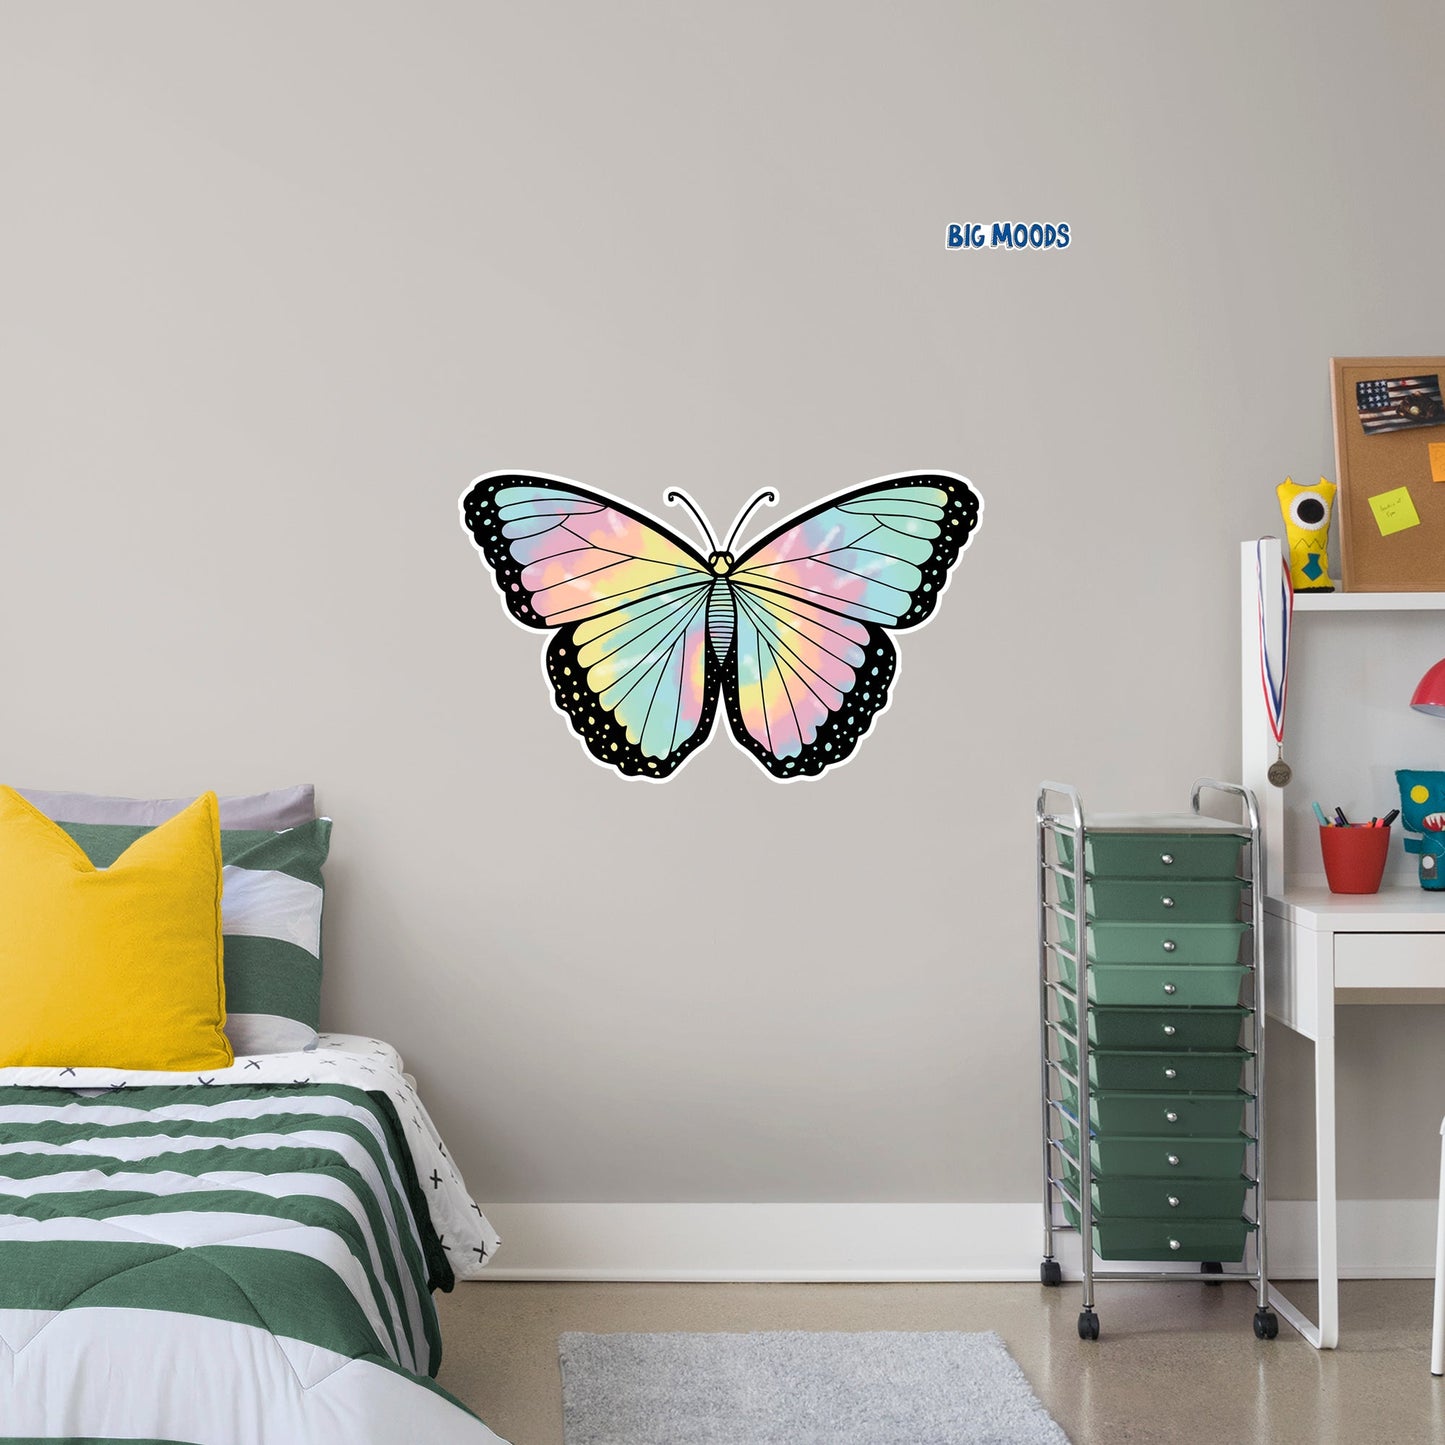 Butterfly (Tie-Dye)        - Officially Licensed Big Moods Removable     Adhesive Decal